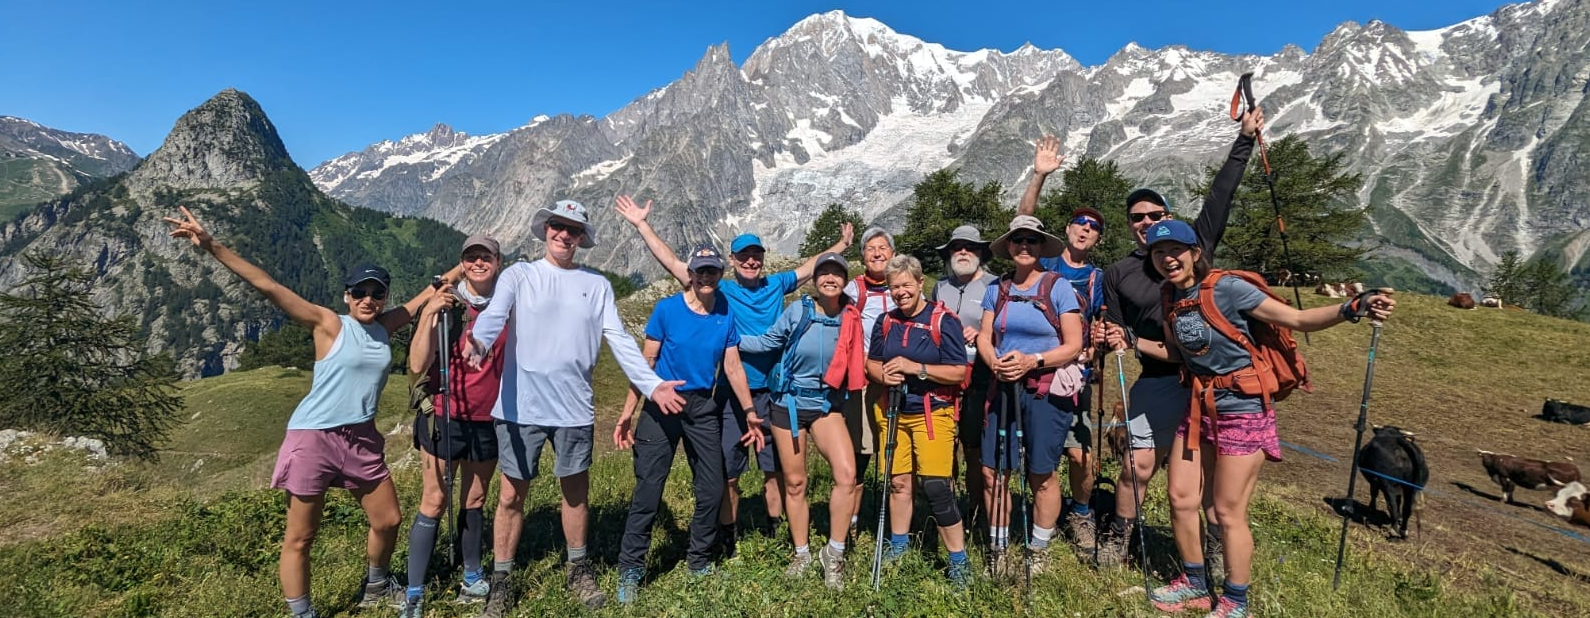 Group of hikers on the Tour du Mont Blanc in the Alps.